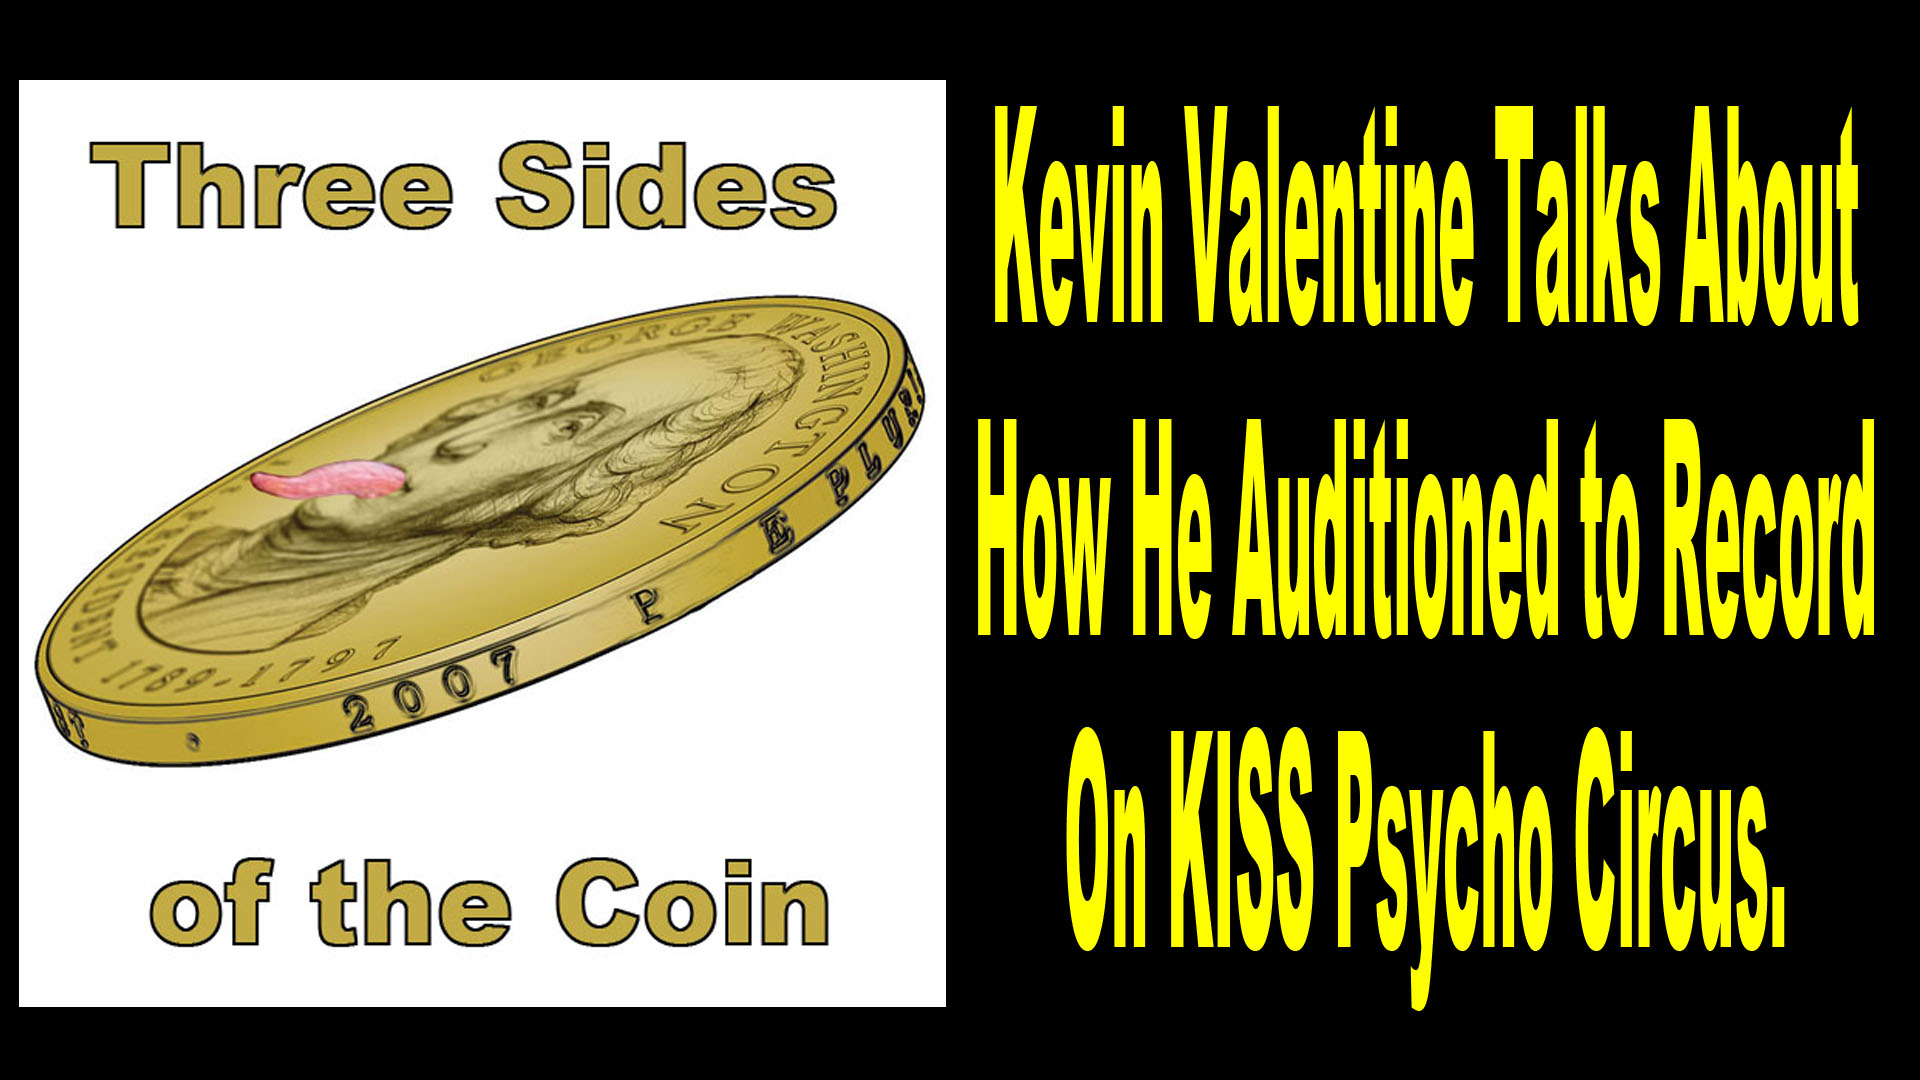 Kevin Valentine Drummer. There's two Sides of a Coin. Three sides